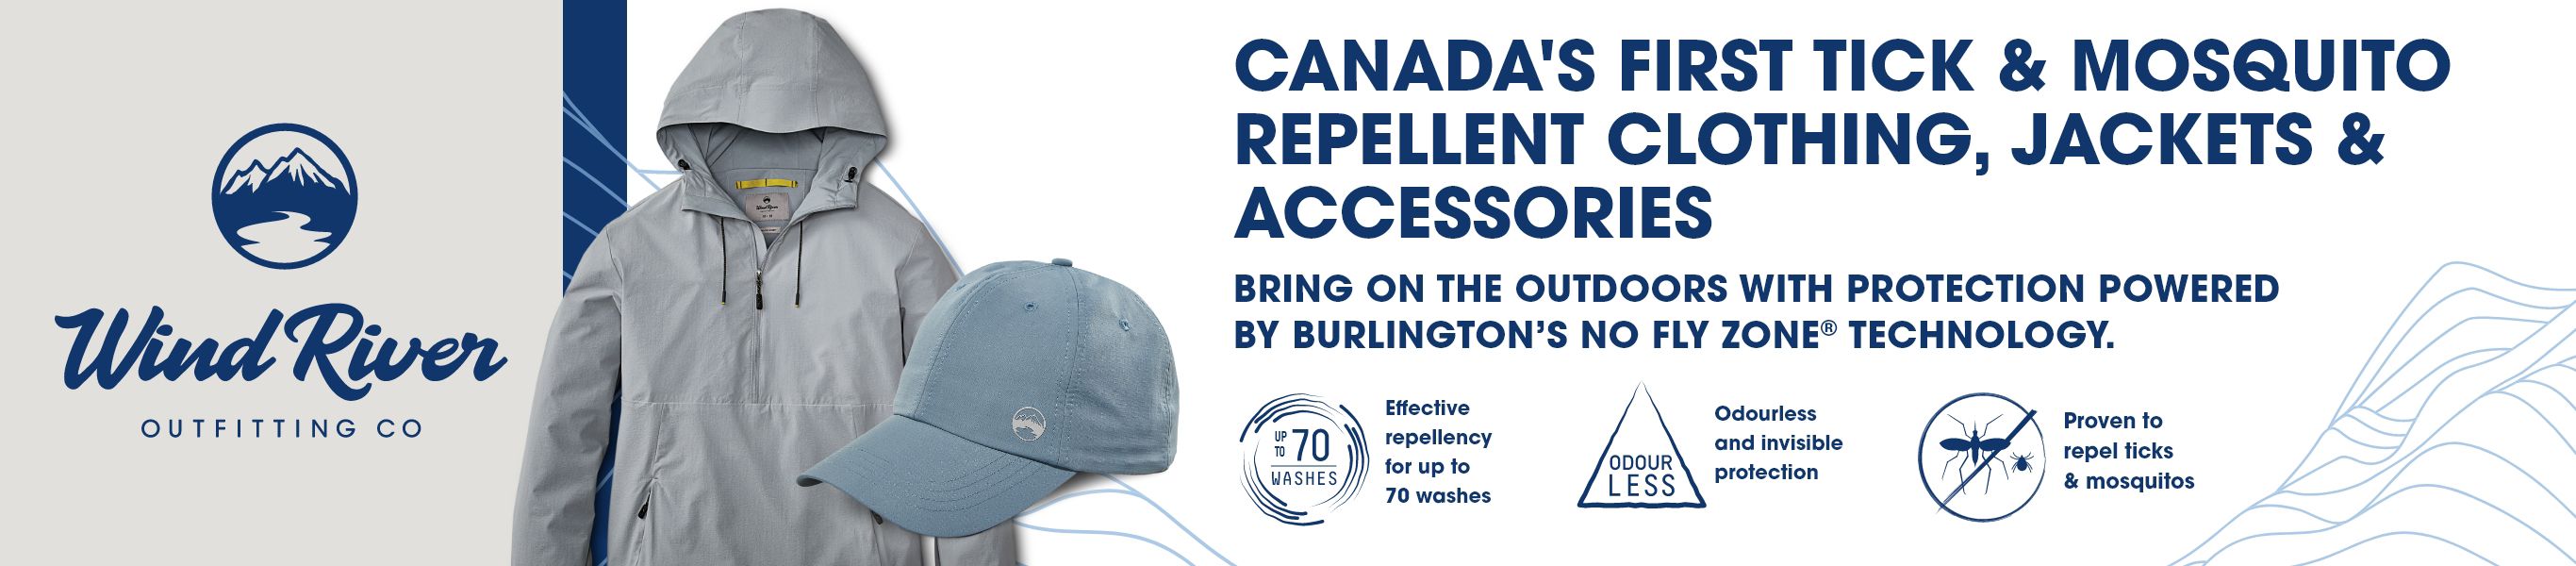 Canada’s first Tick & Mosquito Repellent Clothing